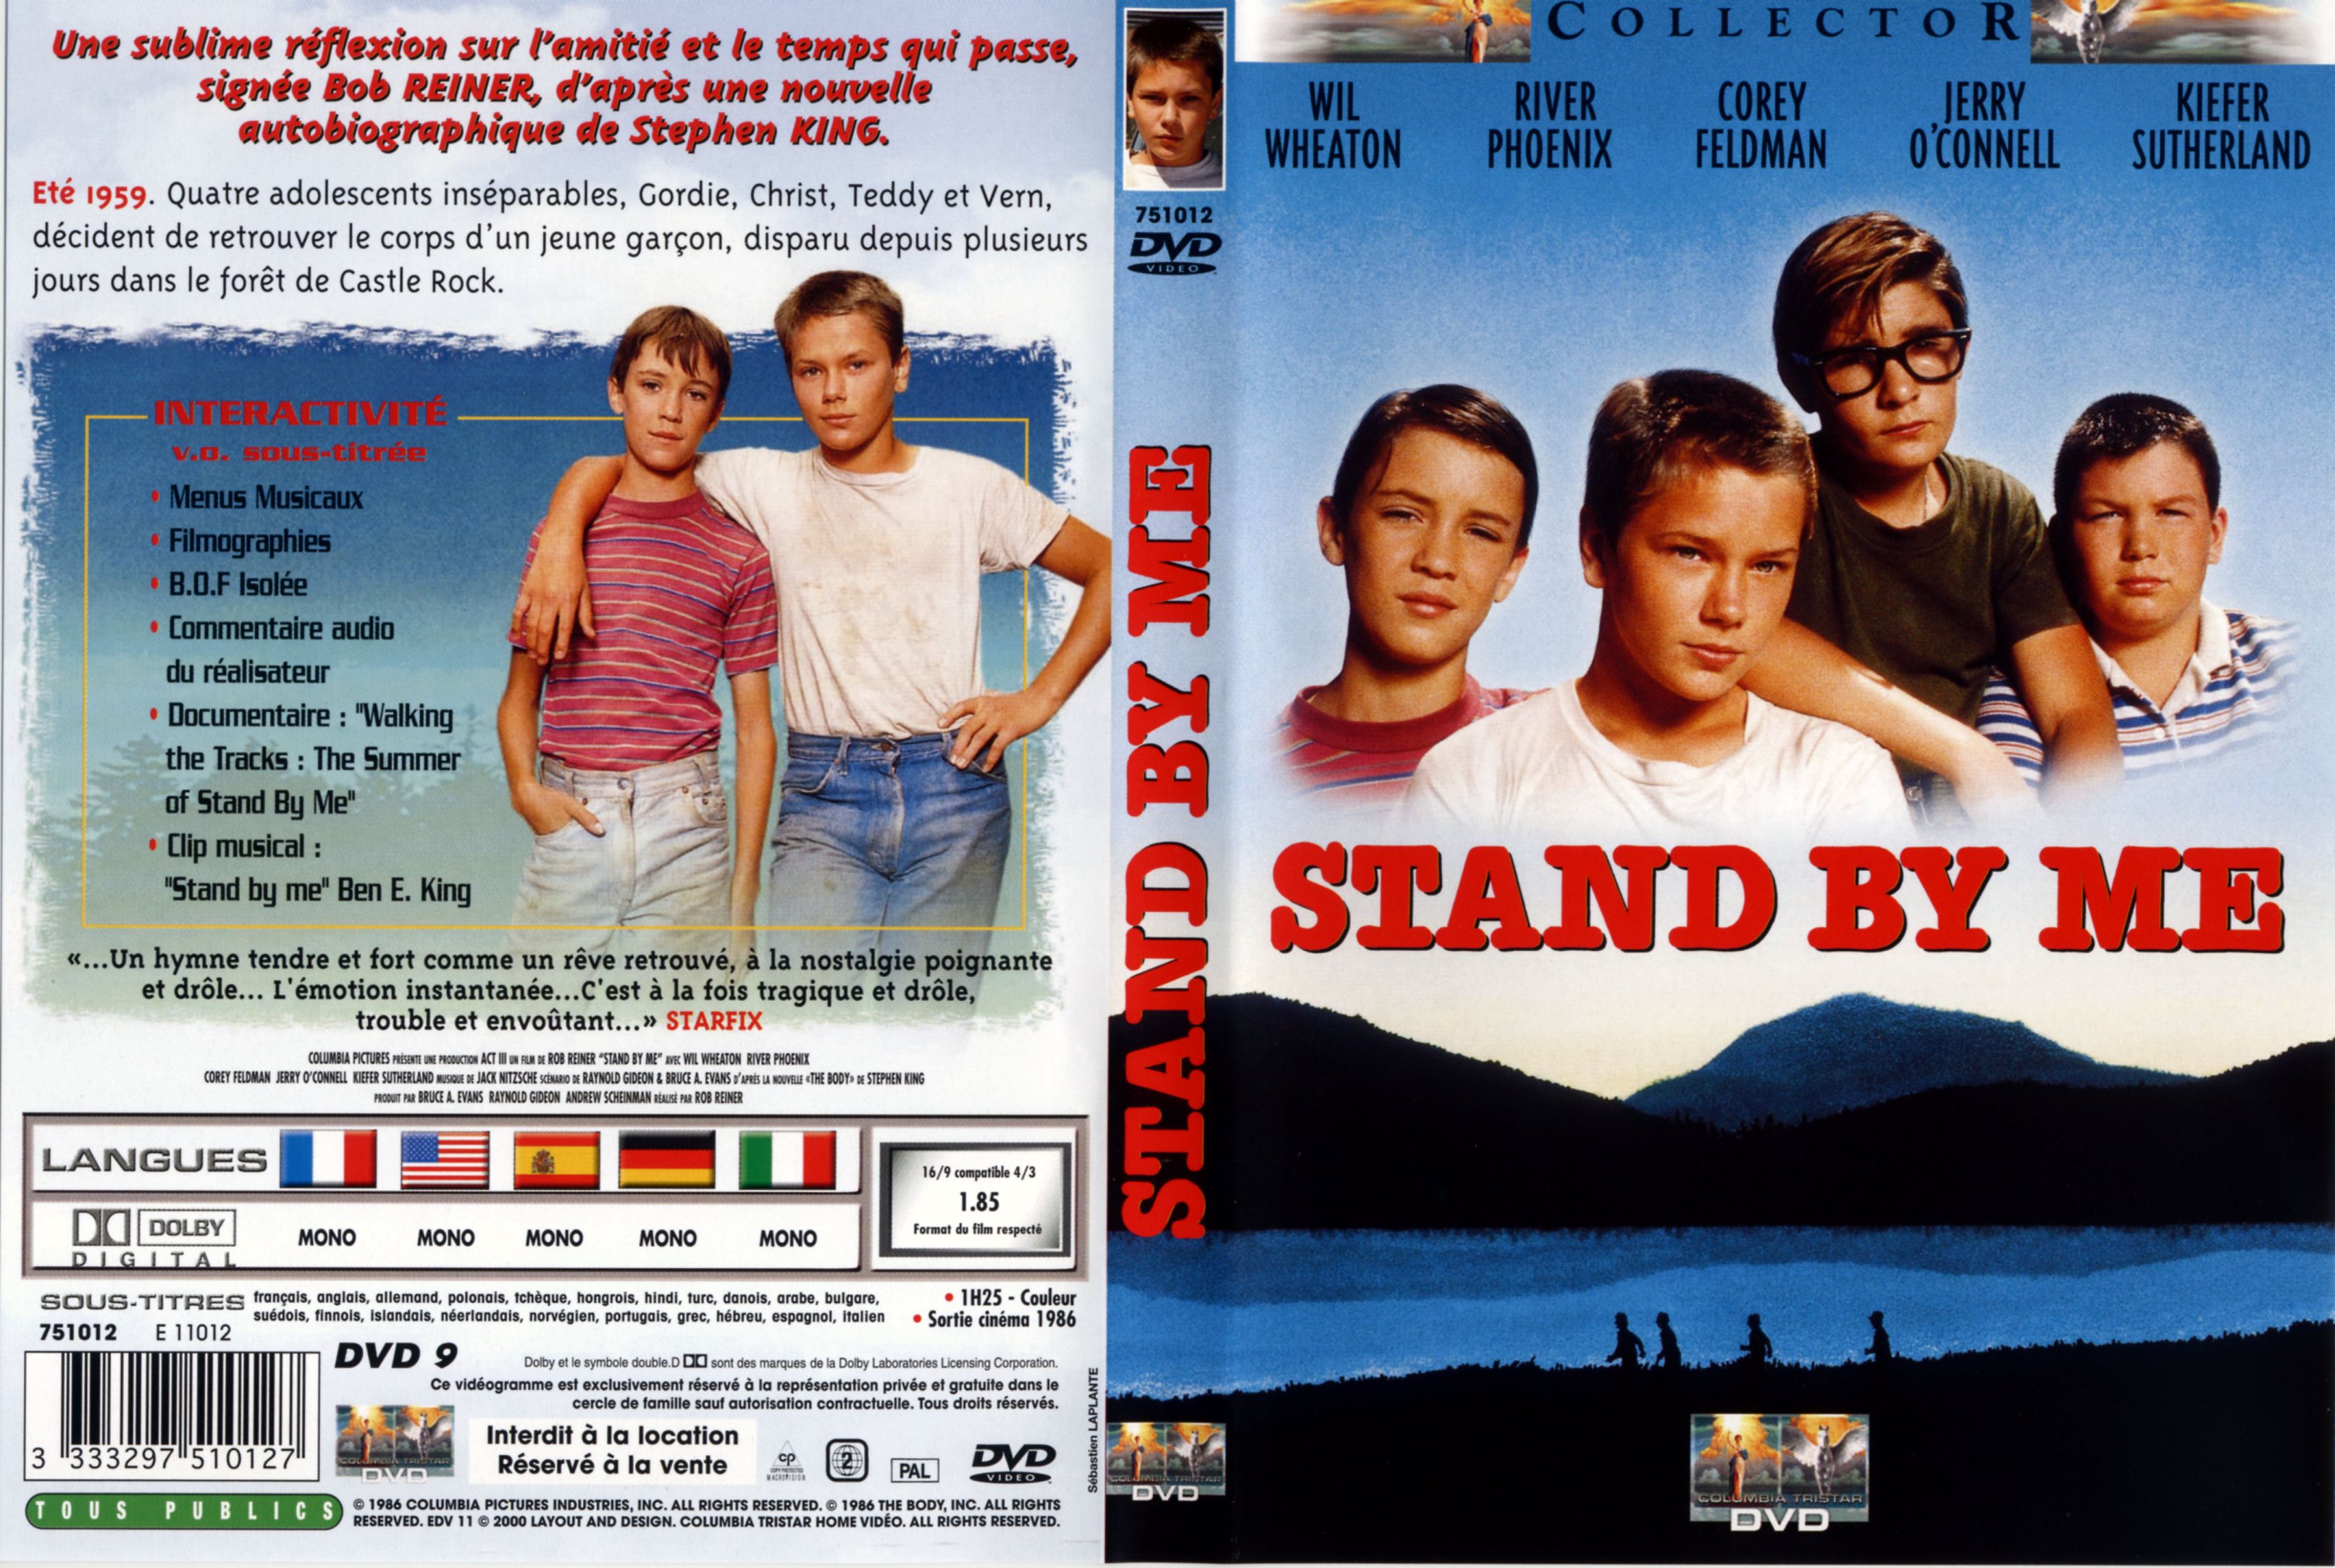 Jaquette DVD Stand by me